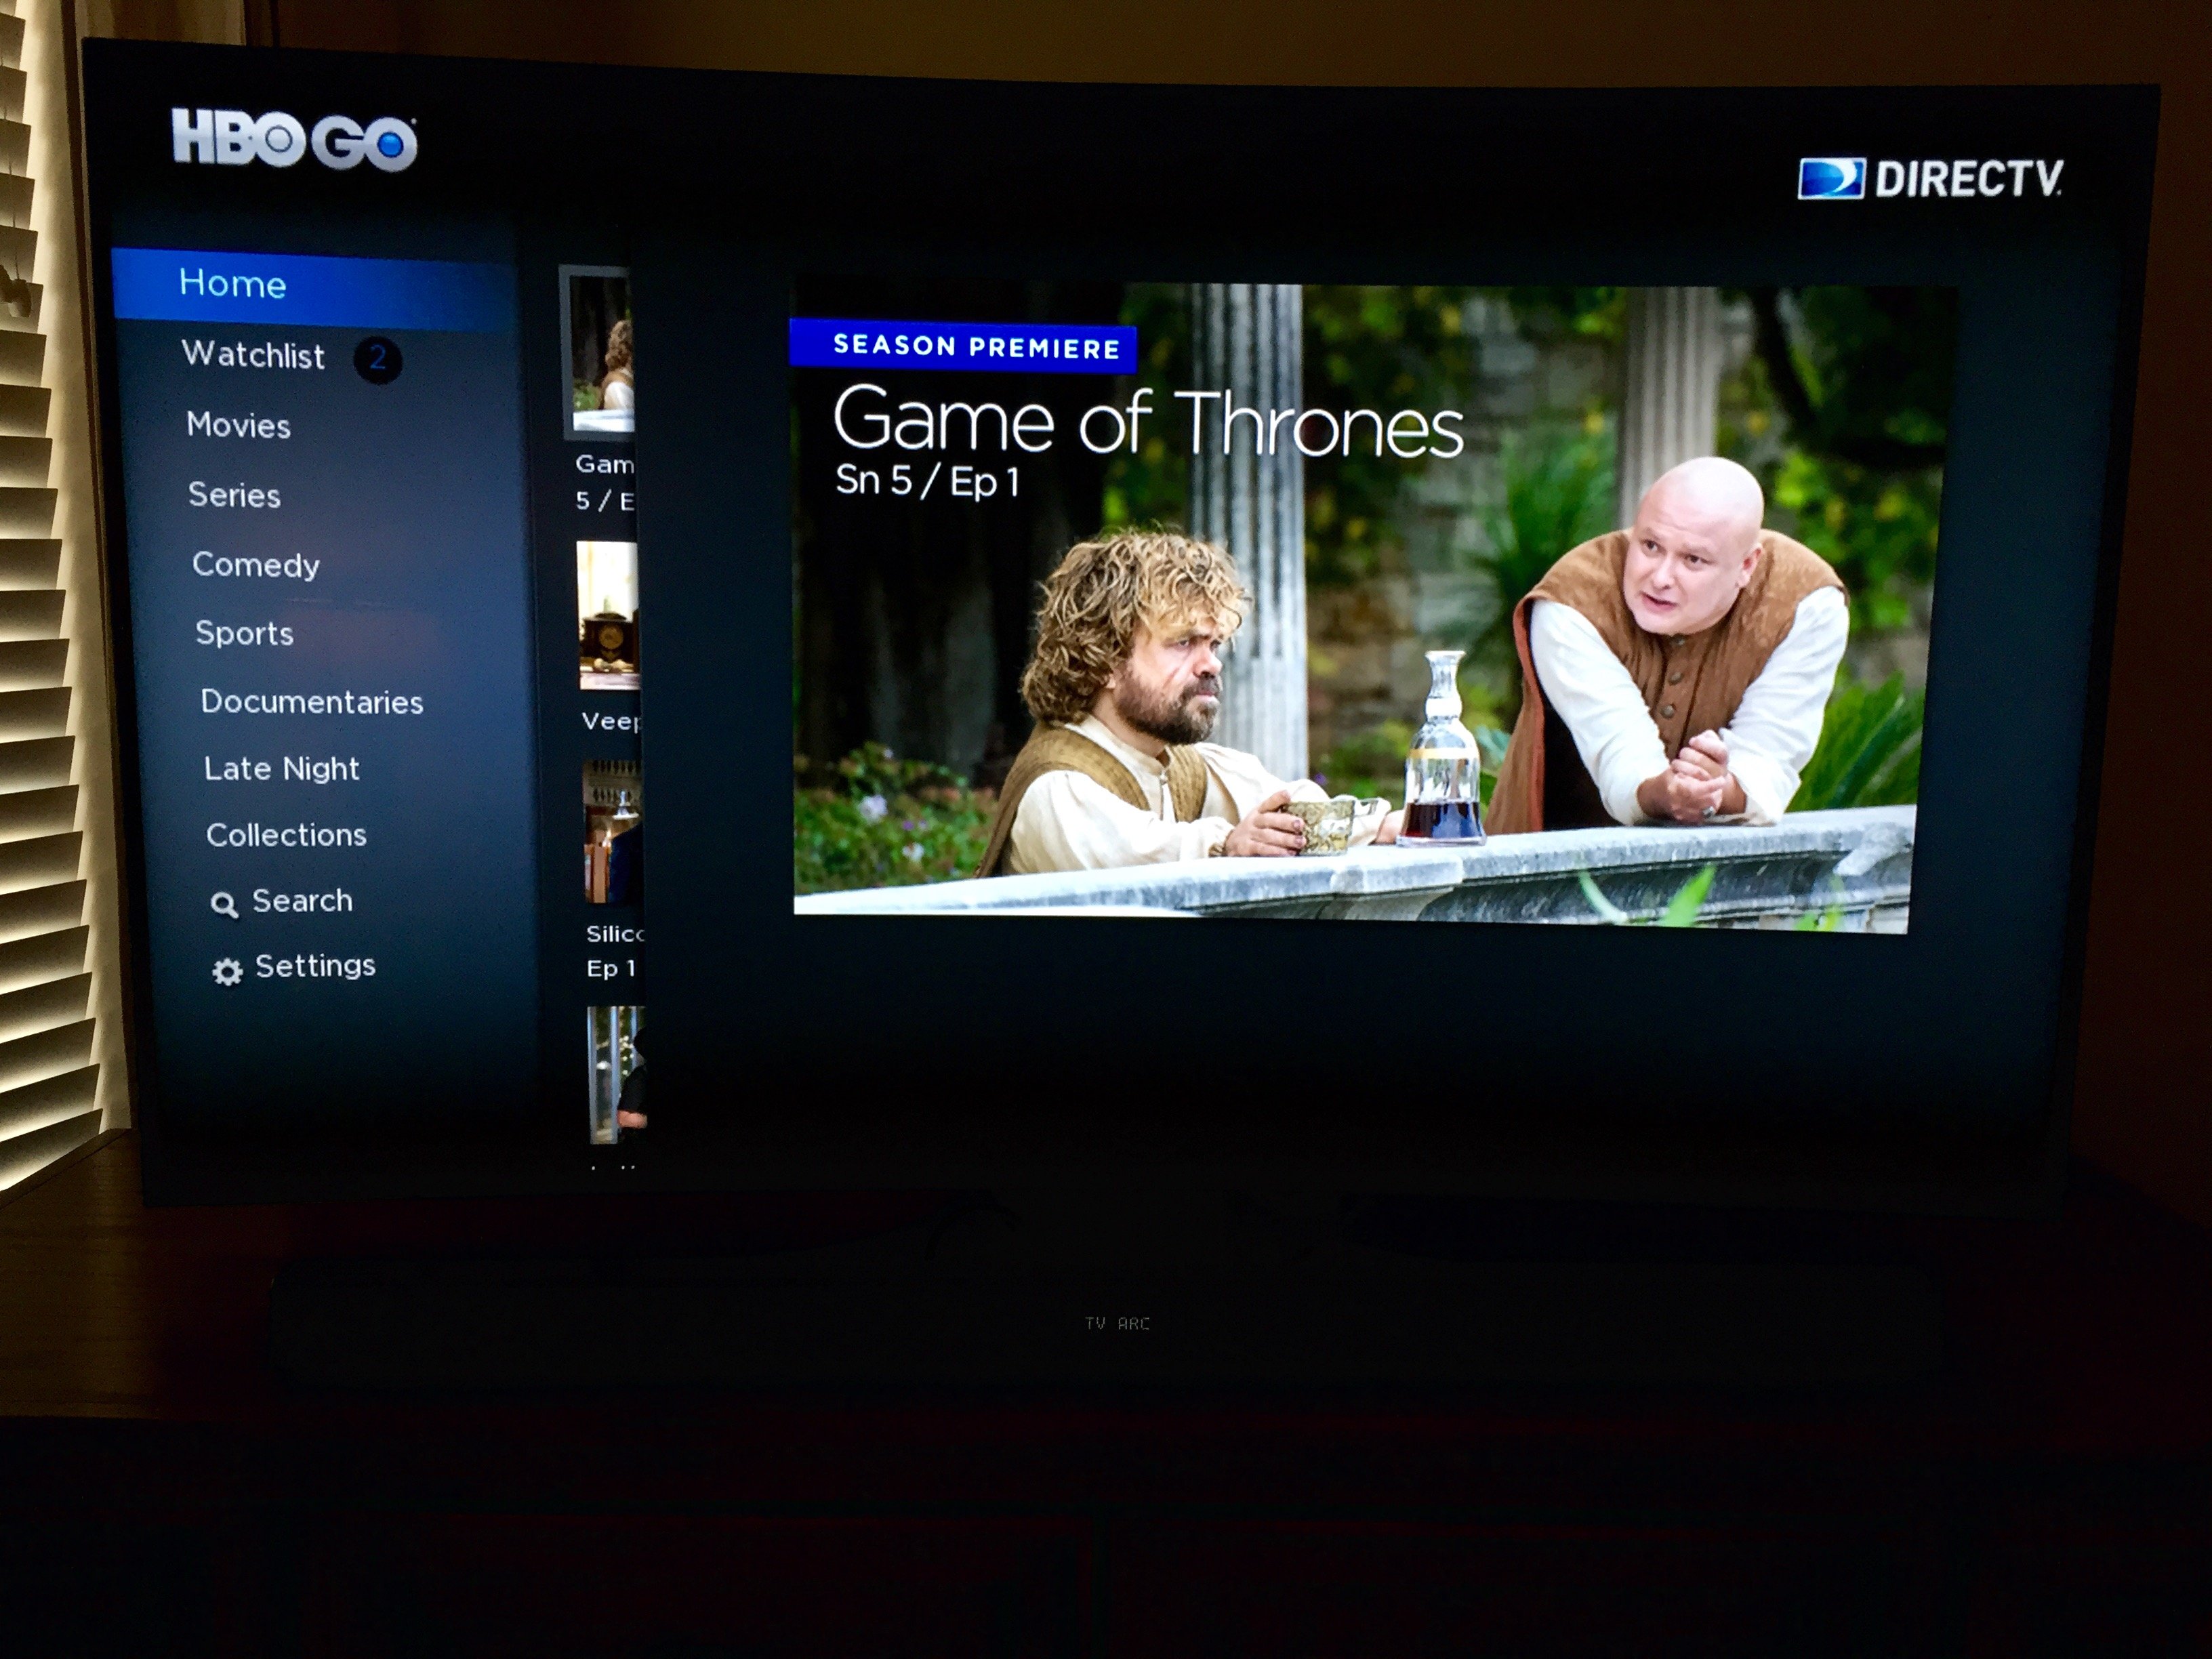 Samsung delivers access to many sources of entertainment right on the HDTV.